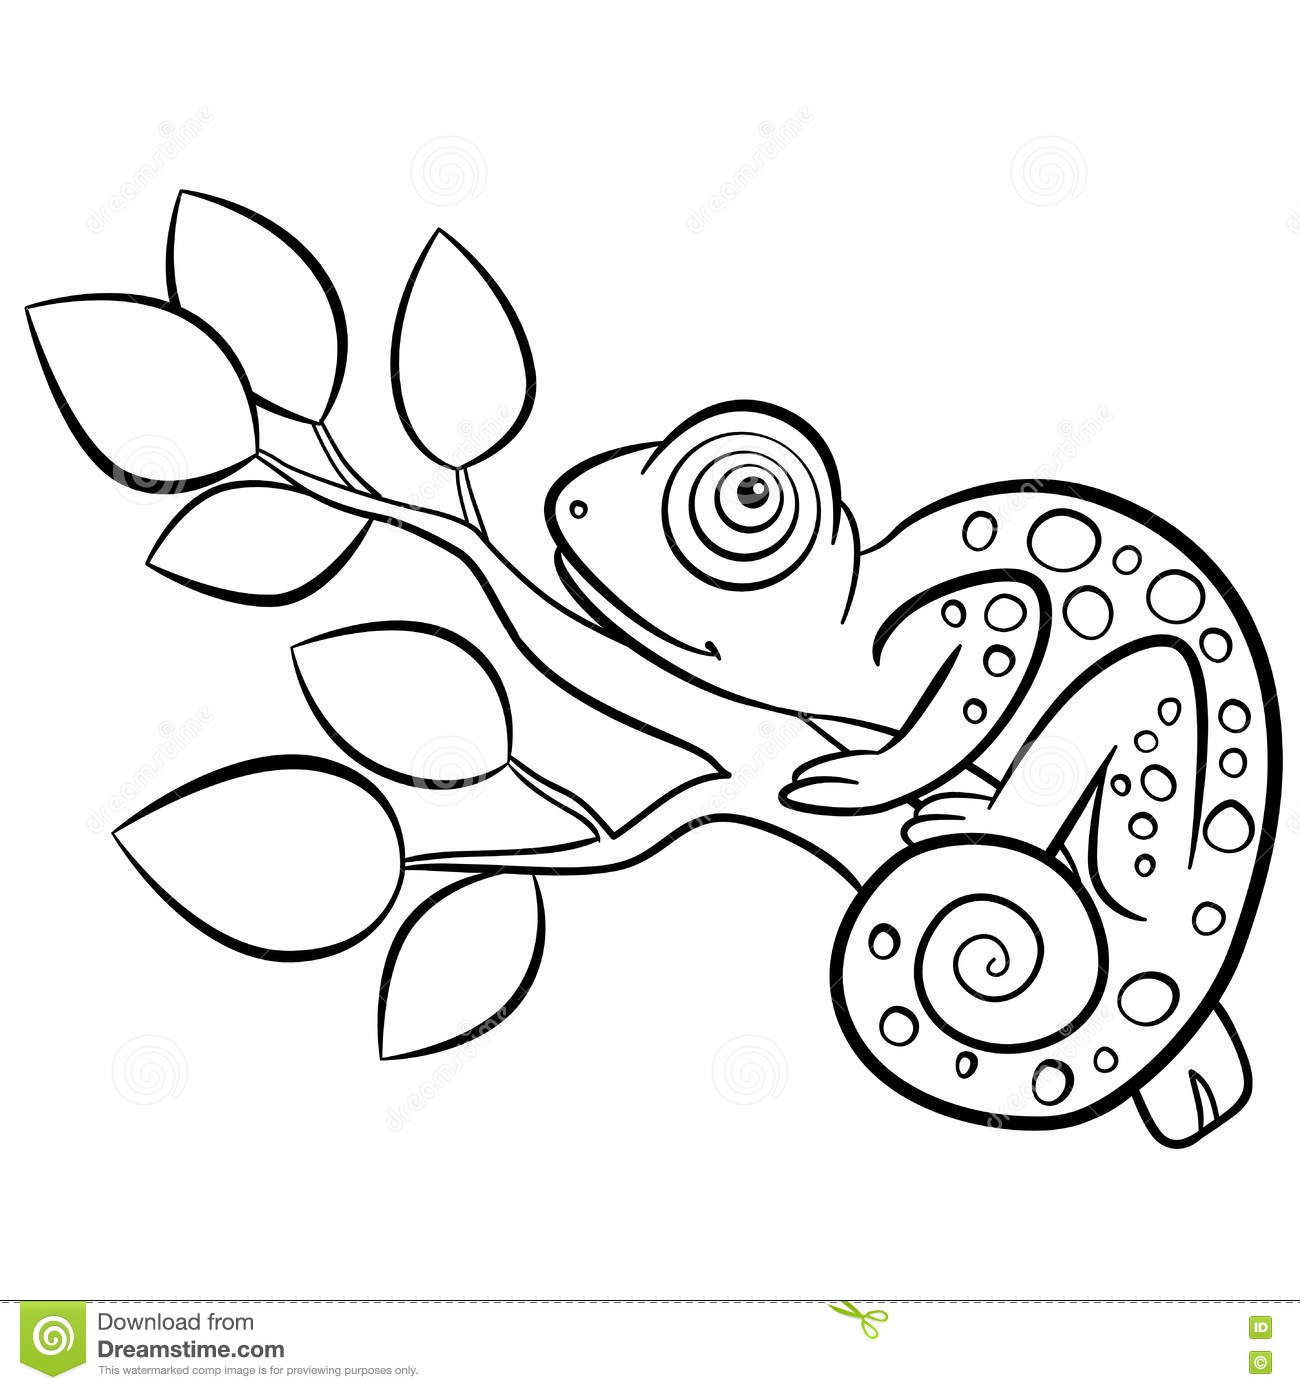 Chameleon Coloring Pages Printable At GetDrawings Free Download